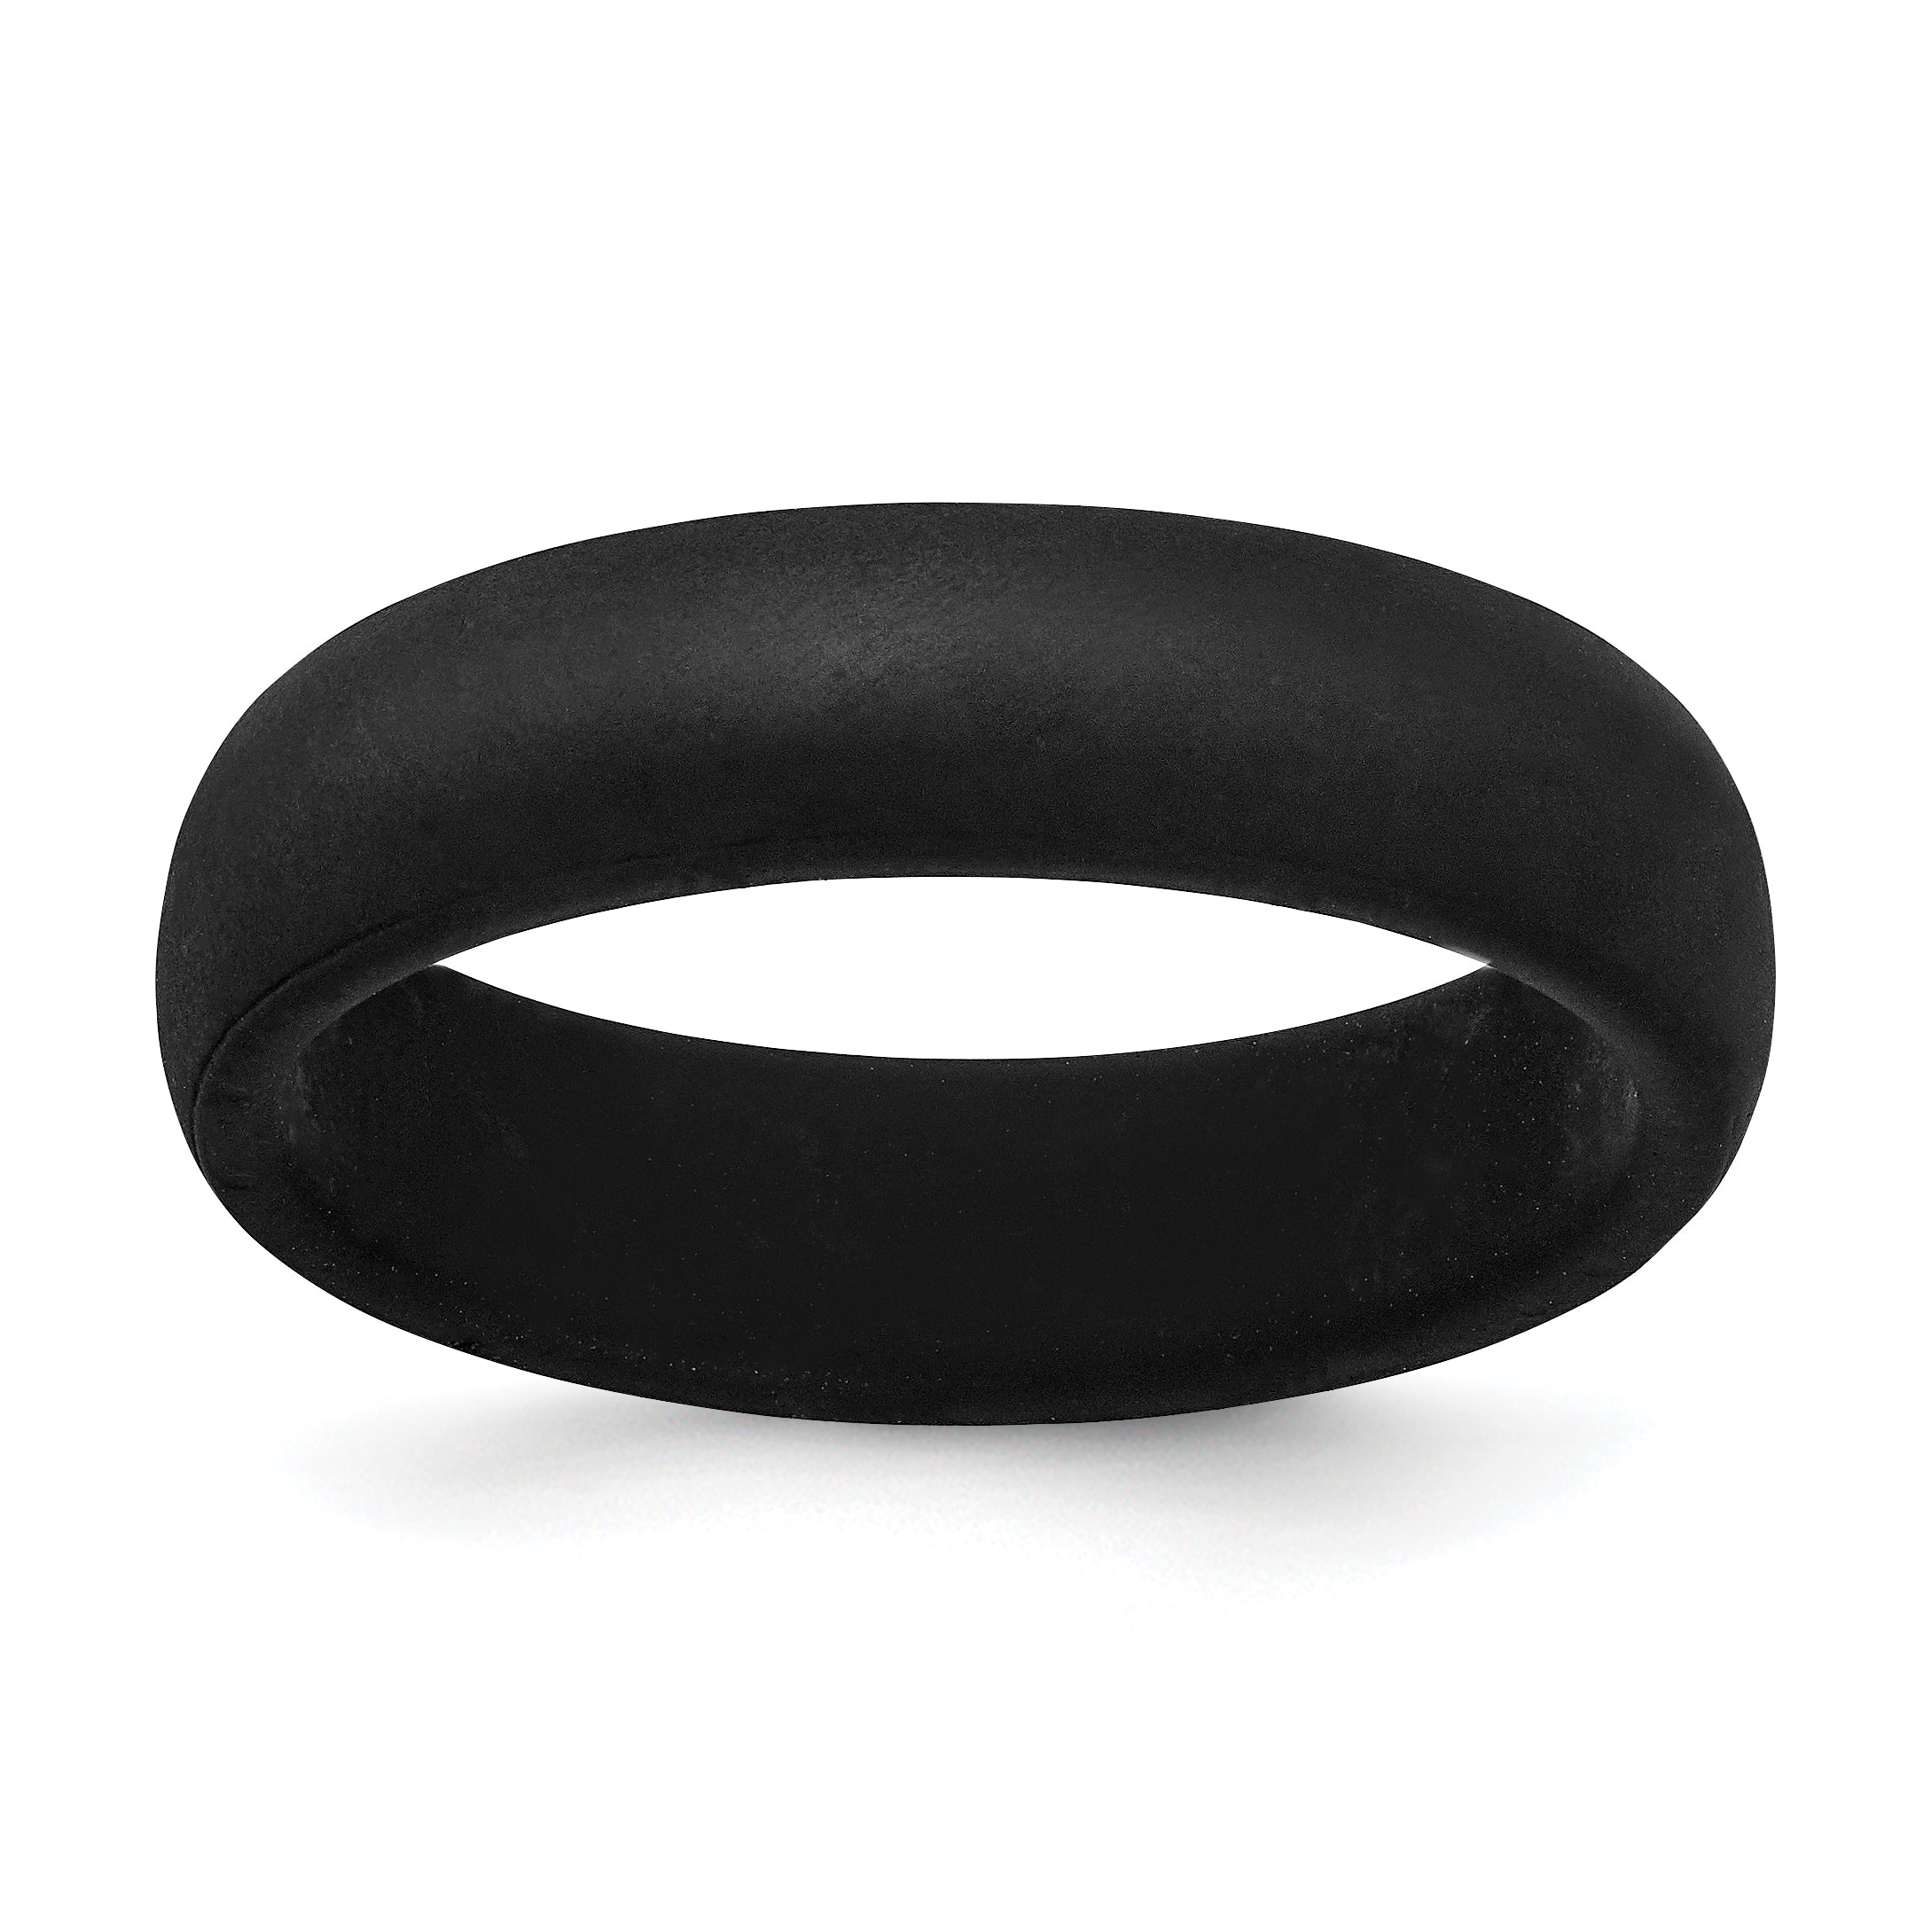 Silicone Black 5.7mm Domed Band Size 10